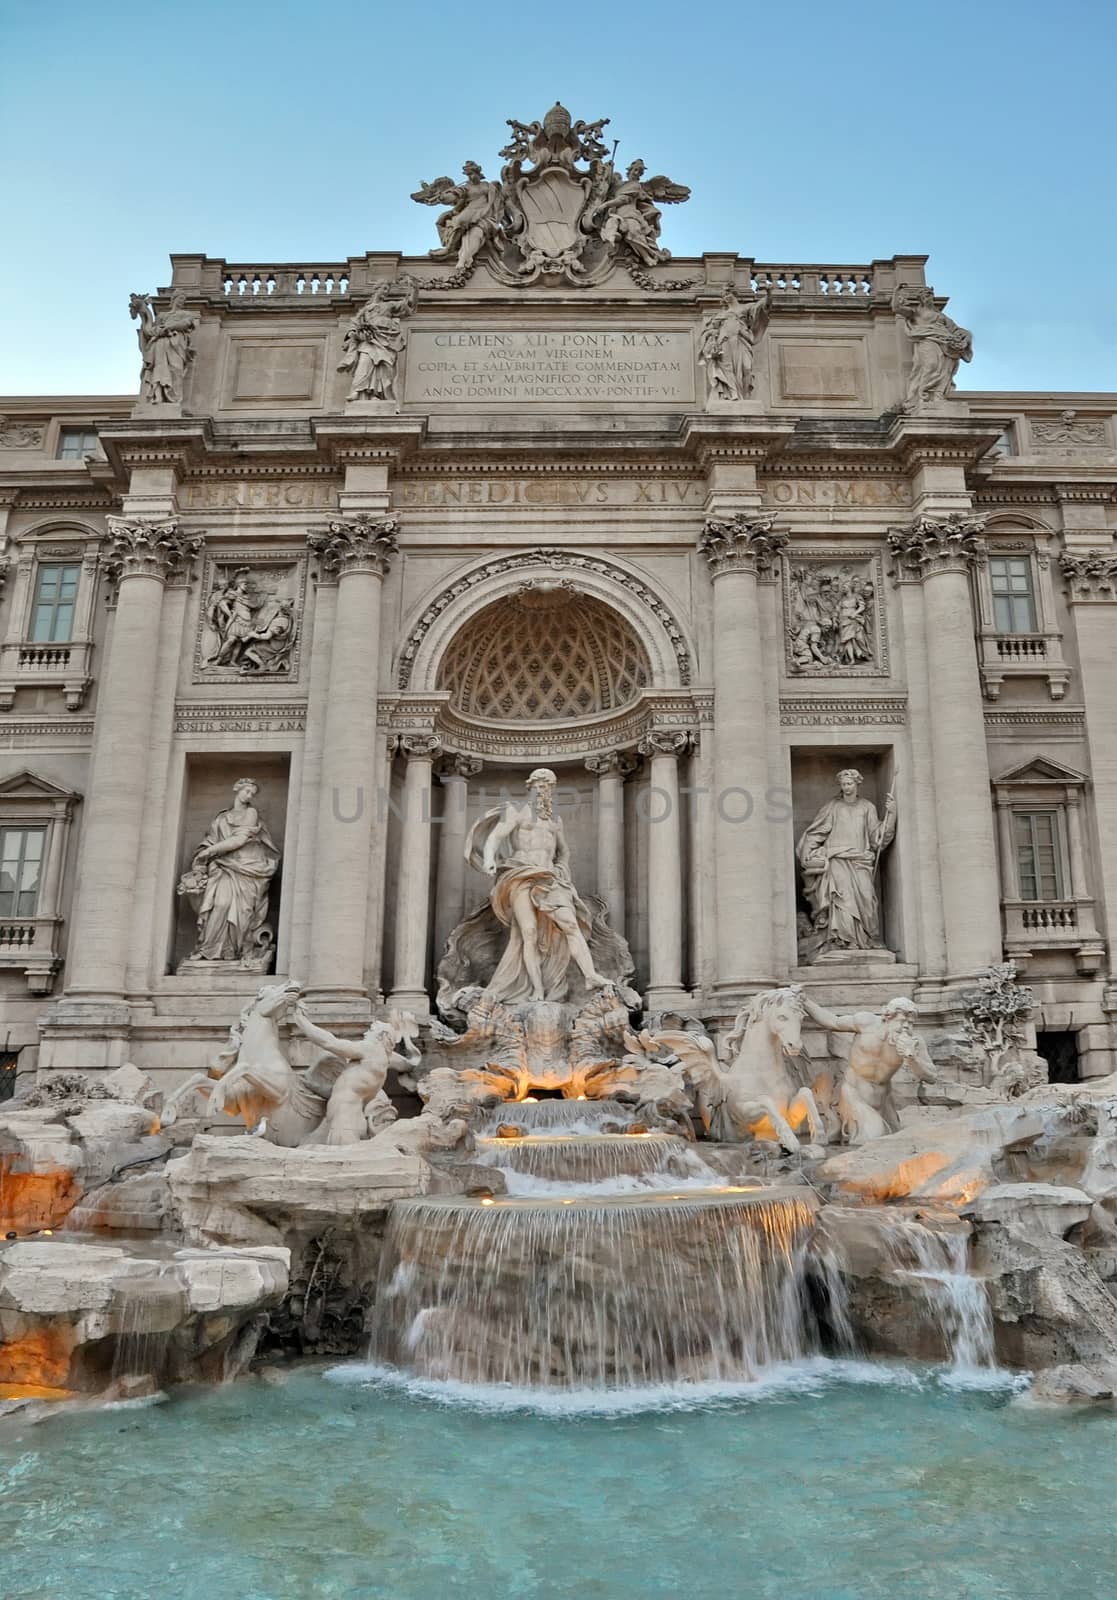 Trevi fountain in Rome by anderm